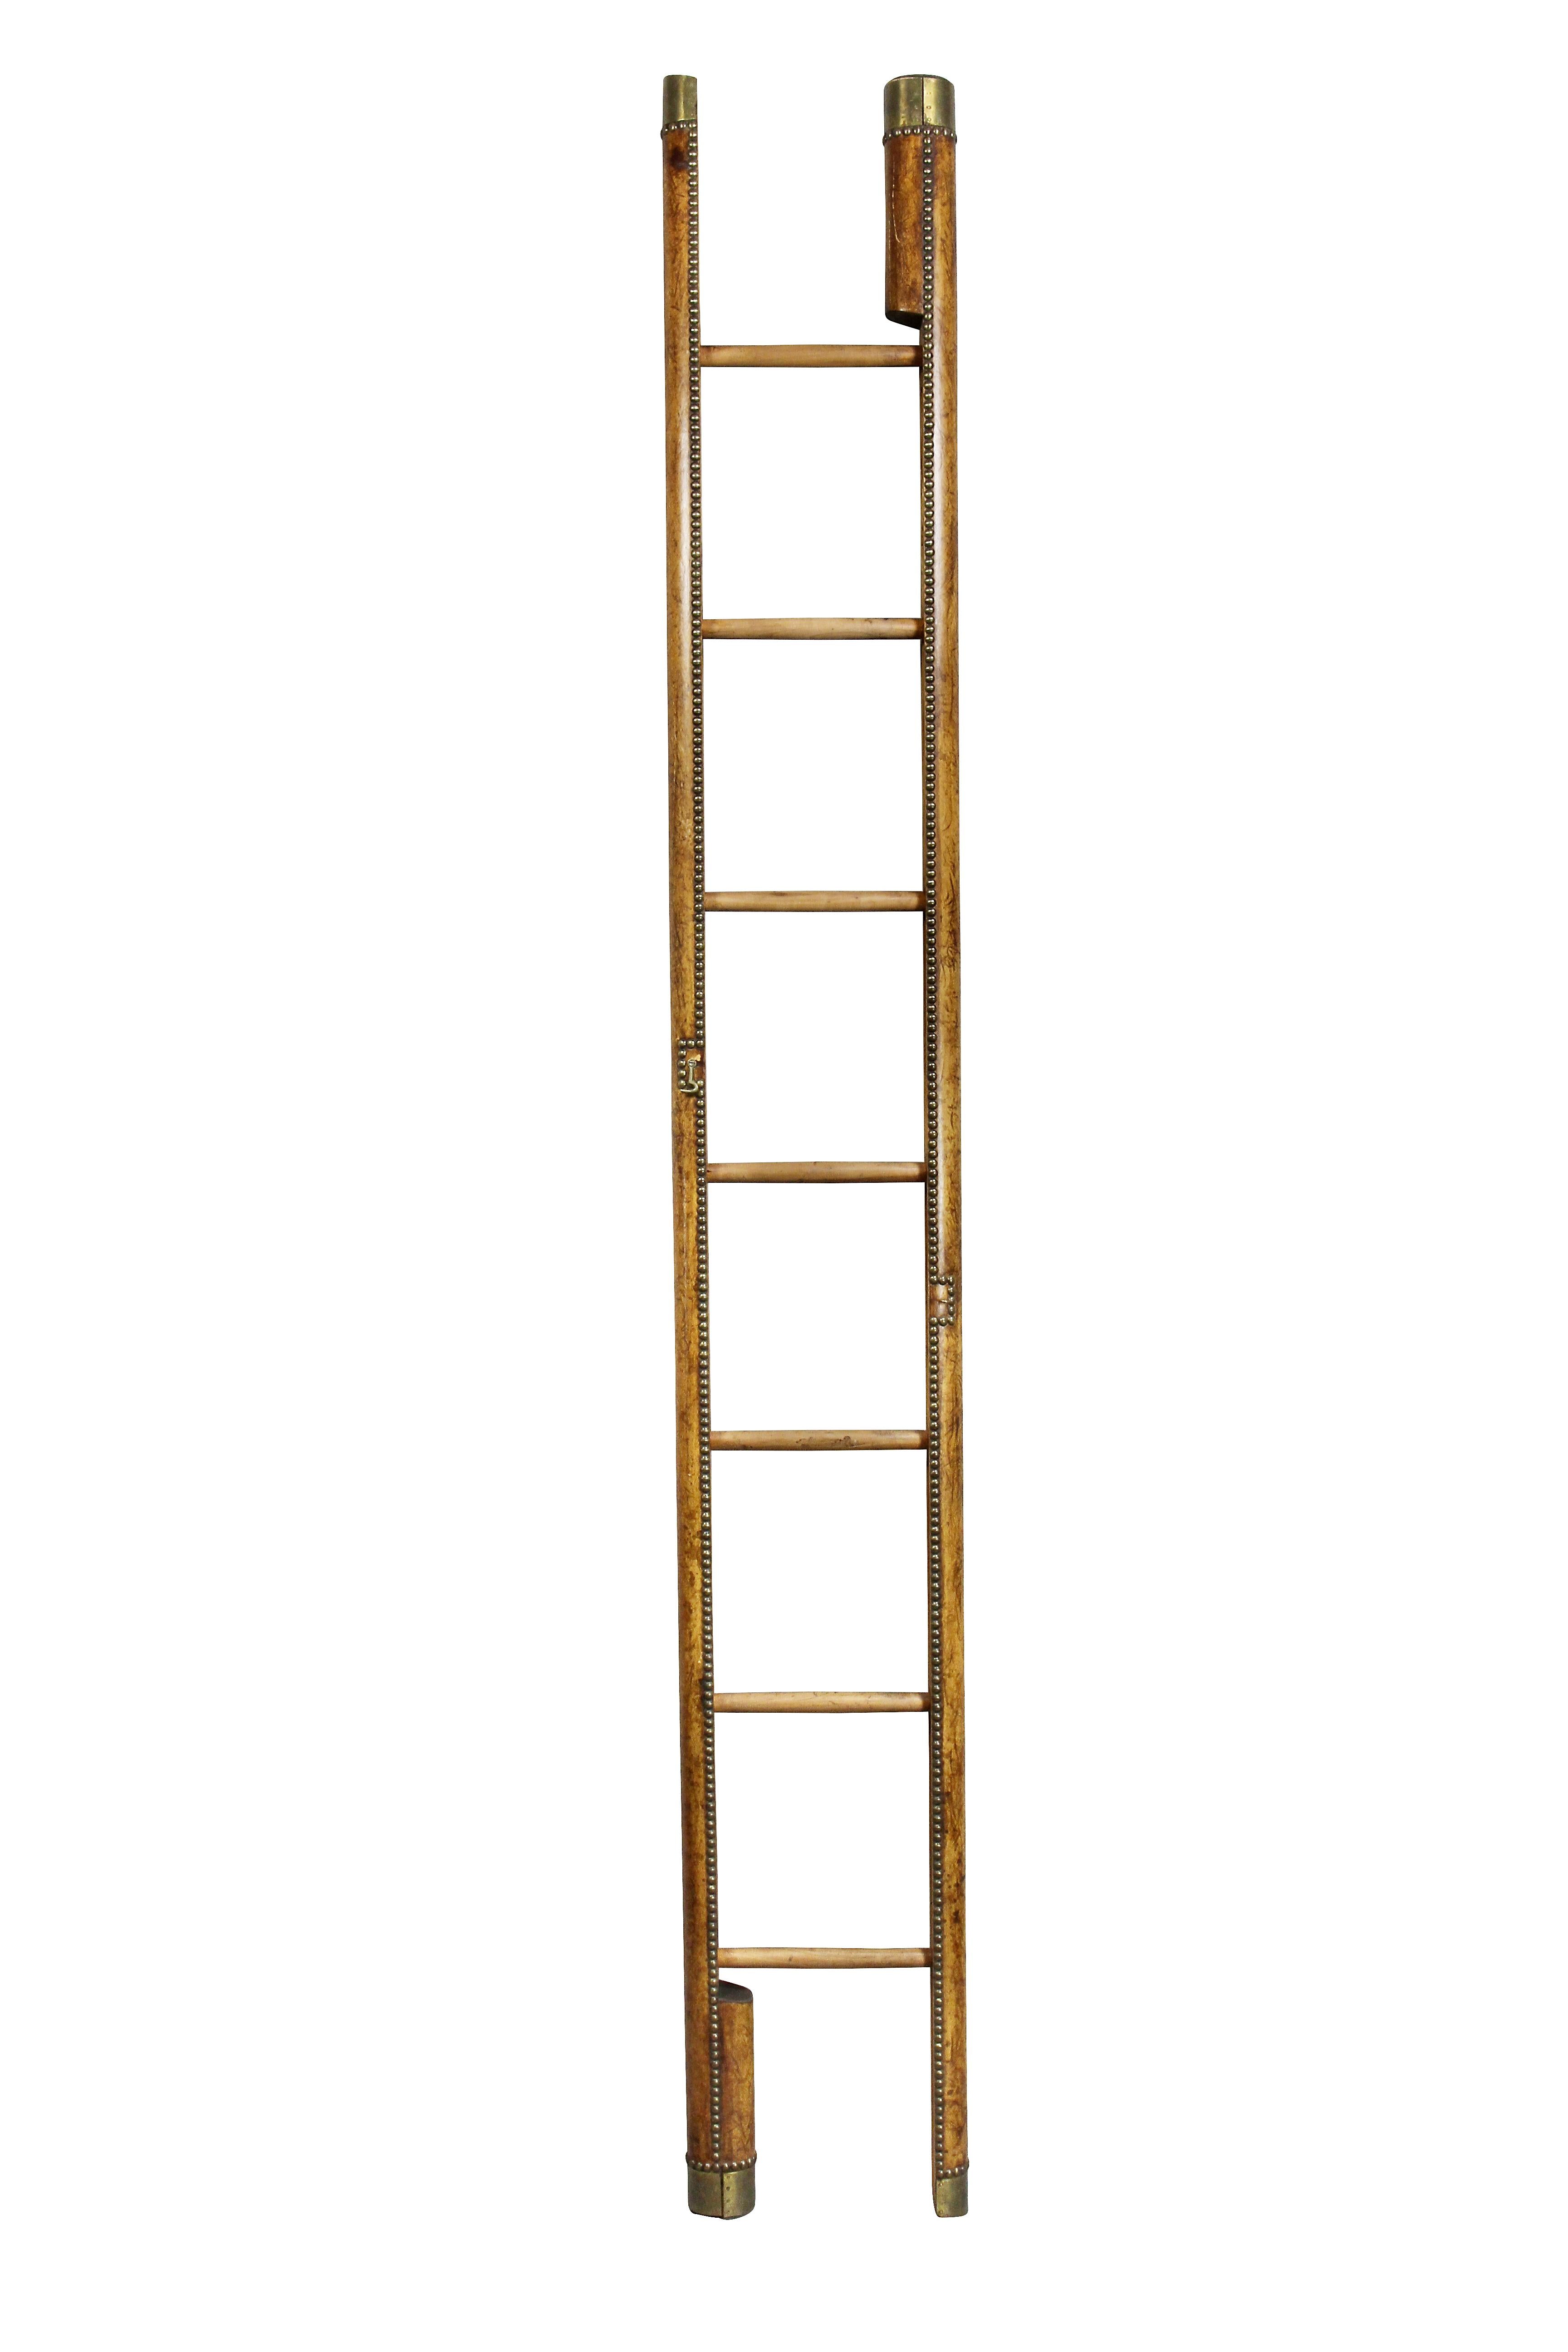 When closed looks like a pole but opens to a ladder. Wood frame covered in leather. Steps are wood.